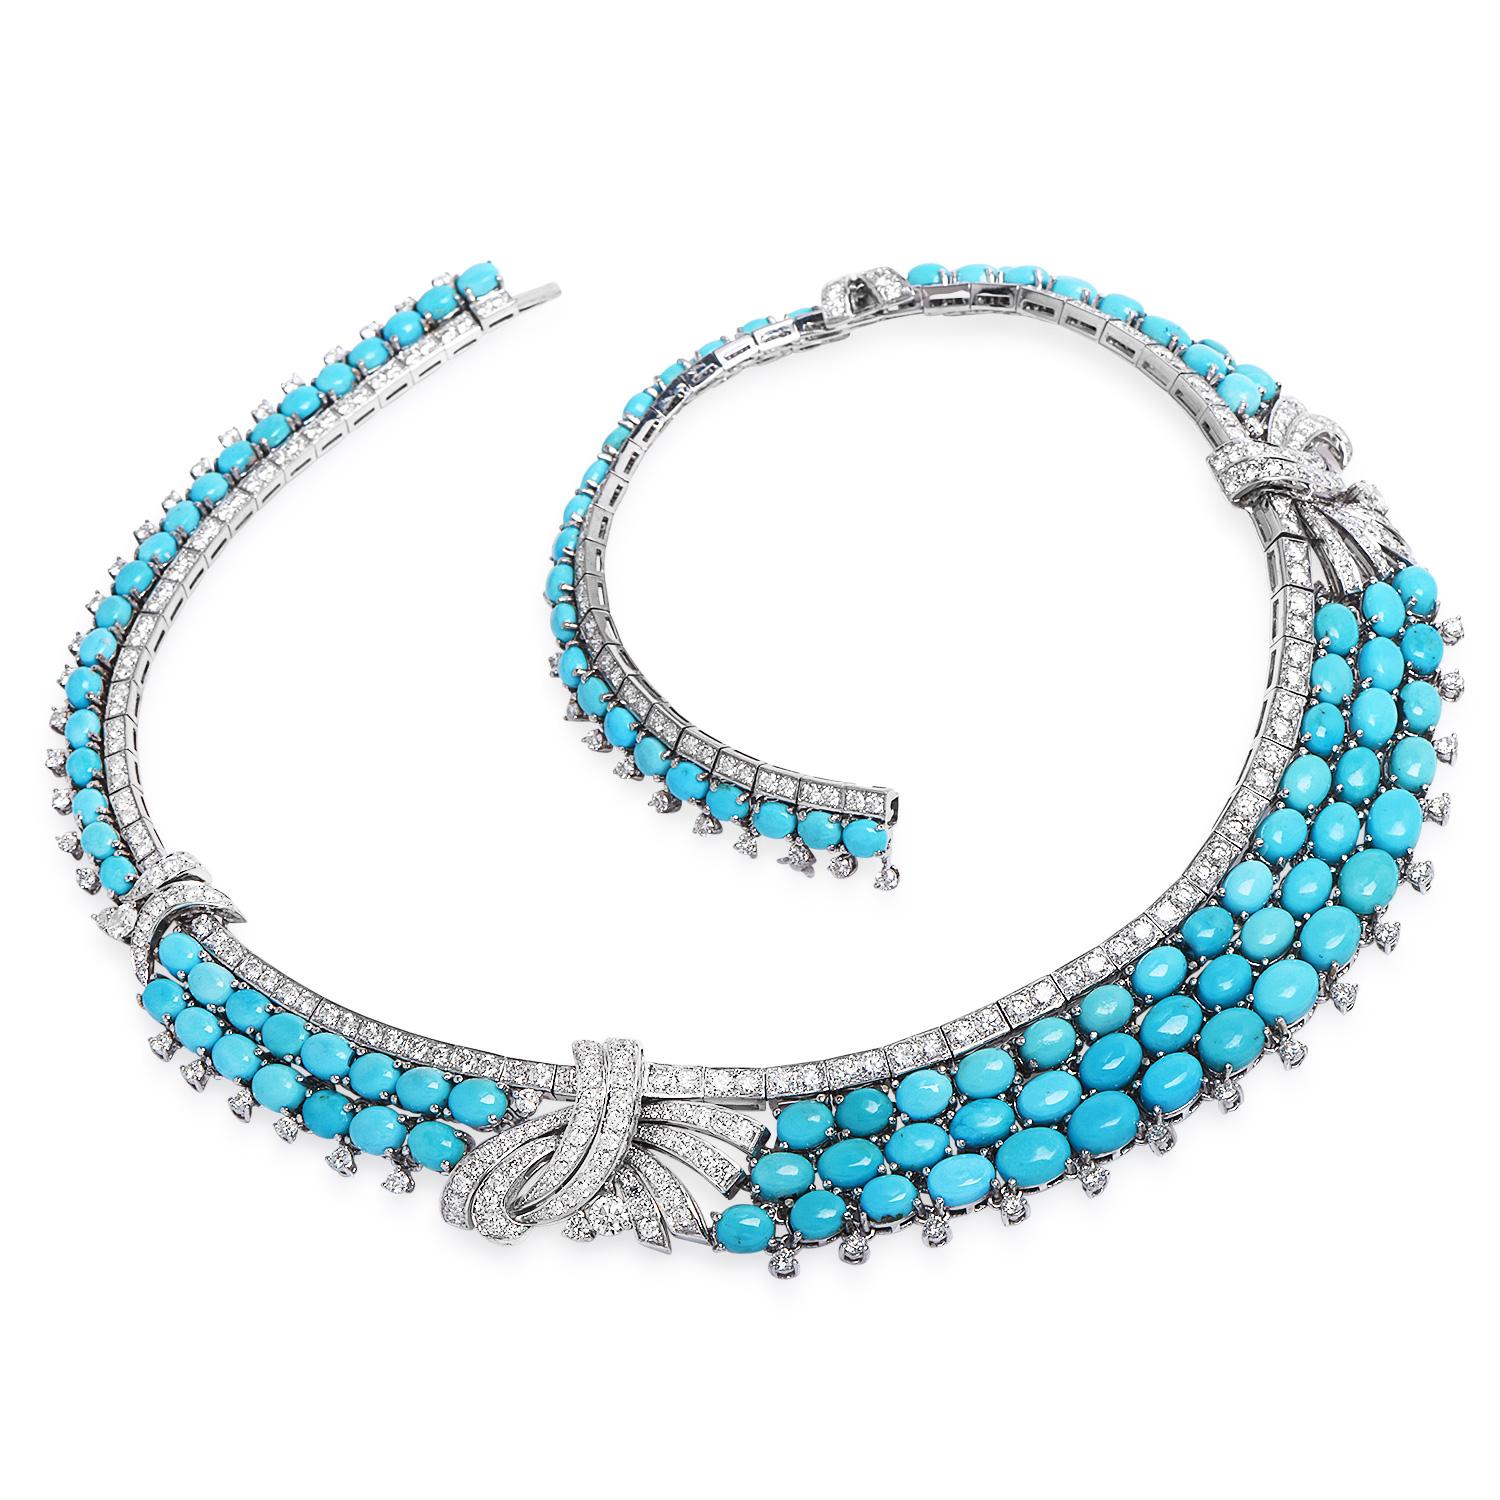 A marvelous display of natural Persian Turquoise and vivid, dazzling sparkle of fine natural diamonds!

Finely crafted in 18K White Gold, this piece is enhanced by three-row links with crossover accents in diamonds dancing all over this